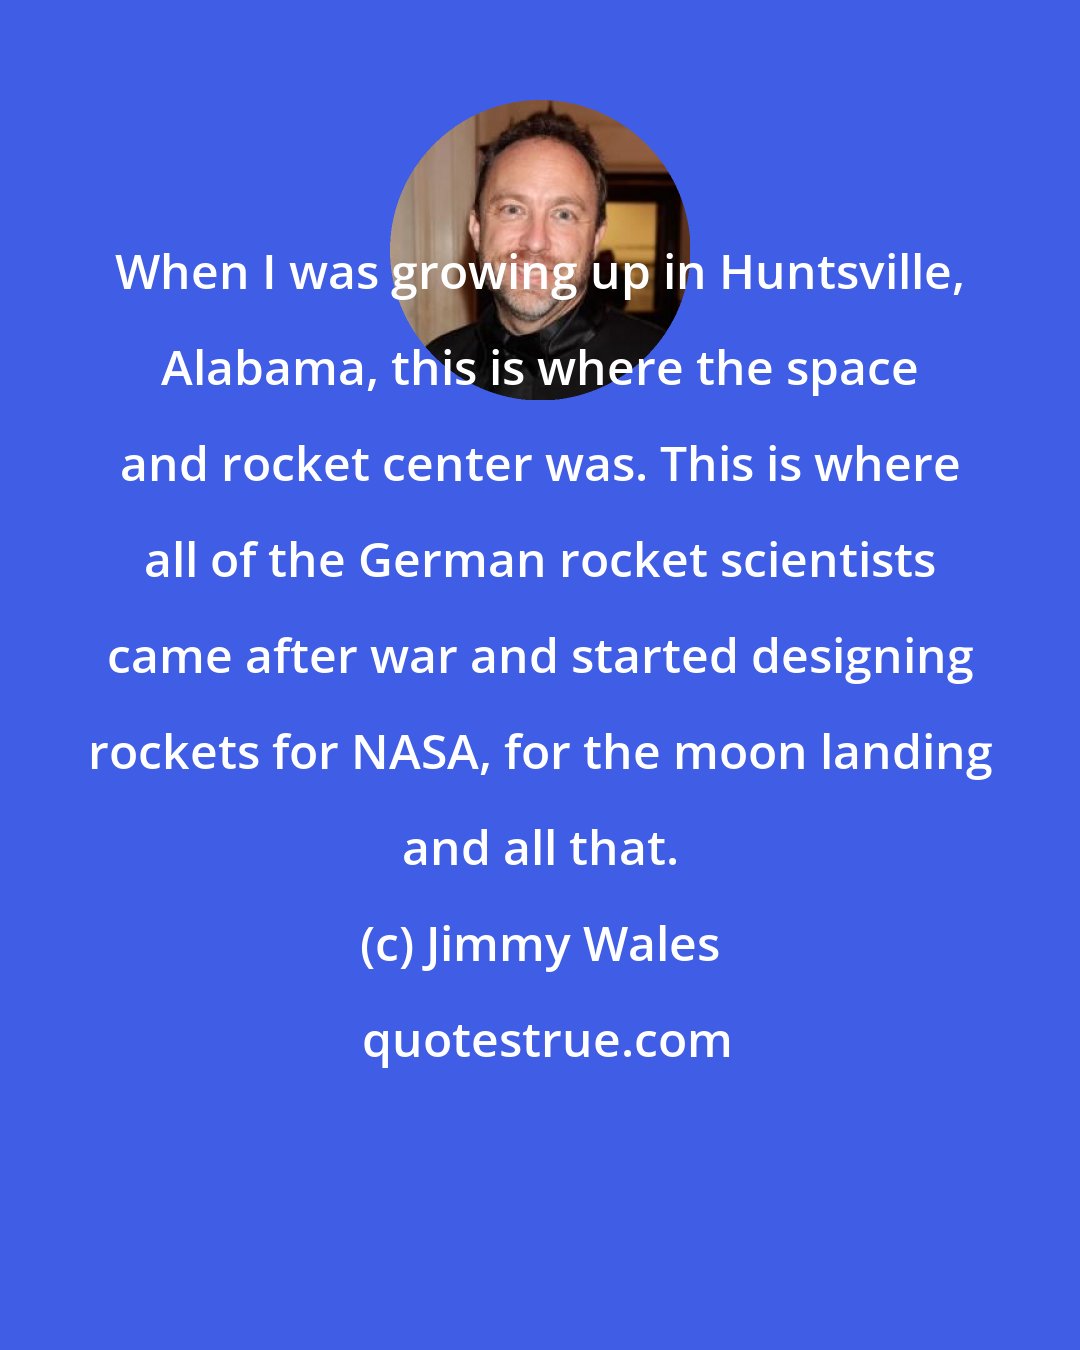 Jimmy Wales: When I was growing up in Huntsville, Alabama, this is where the space and rocket center was. This is where all of the German rocket scientists came after war and started designing rockets for NASA, for the moon landing and all that.